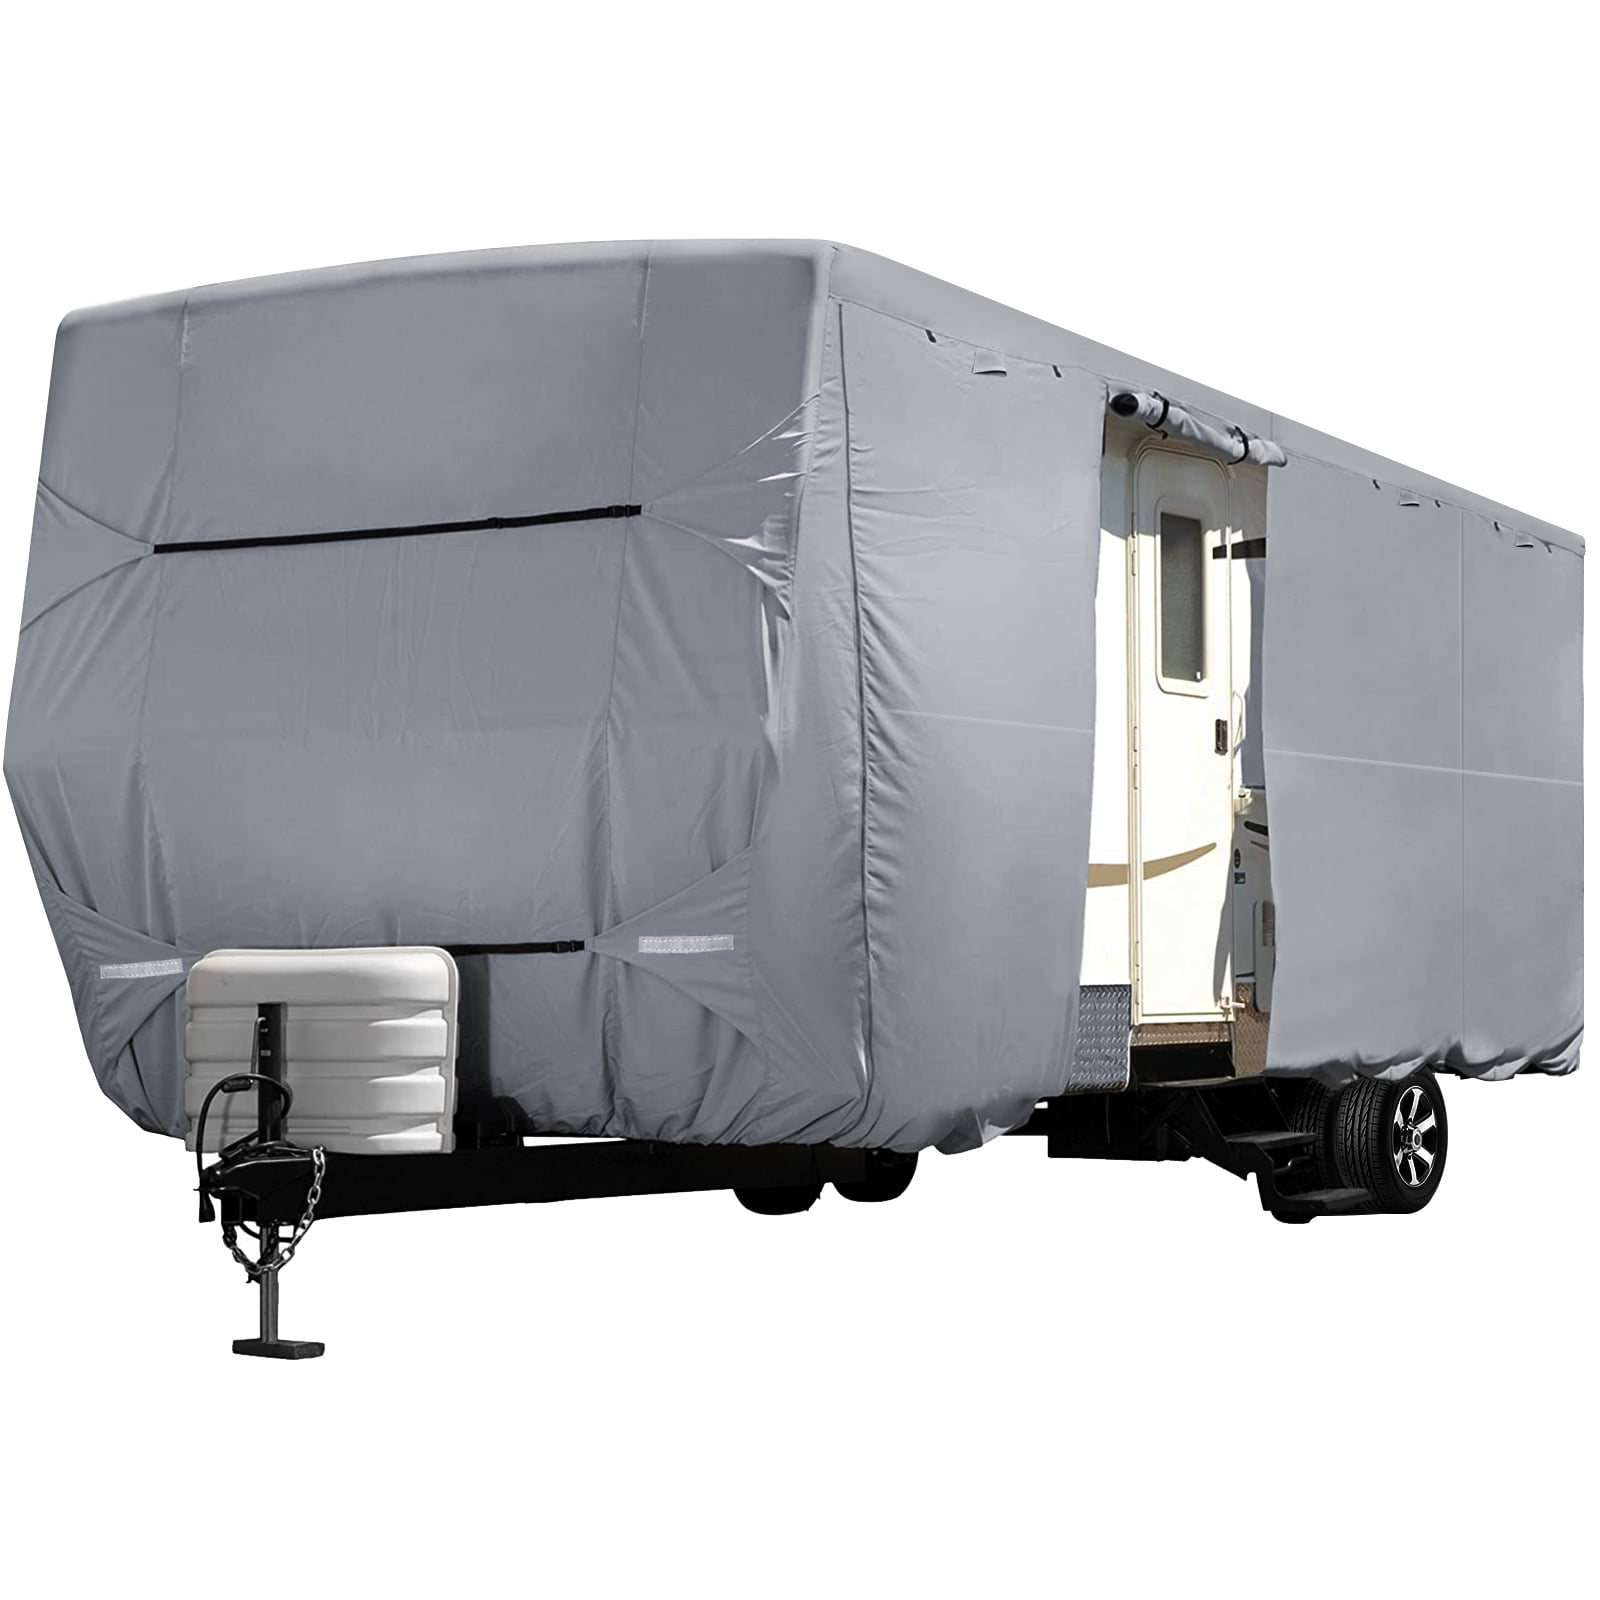 33’ Camper Motorhome with Various Accessories Upgraded Class A RV Cover Non-Woven Fabric Anti-Aging Waterproof Durable Design Fits 30’ 